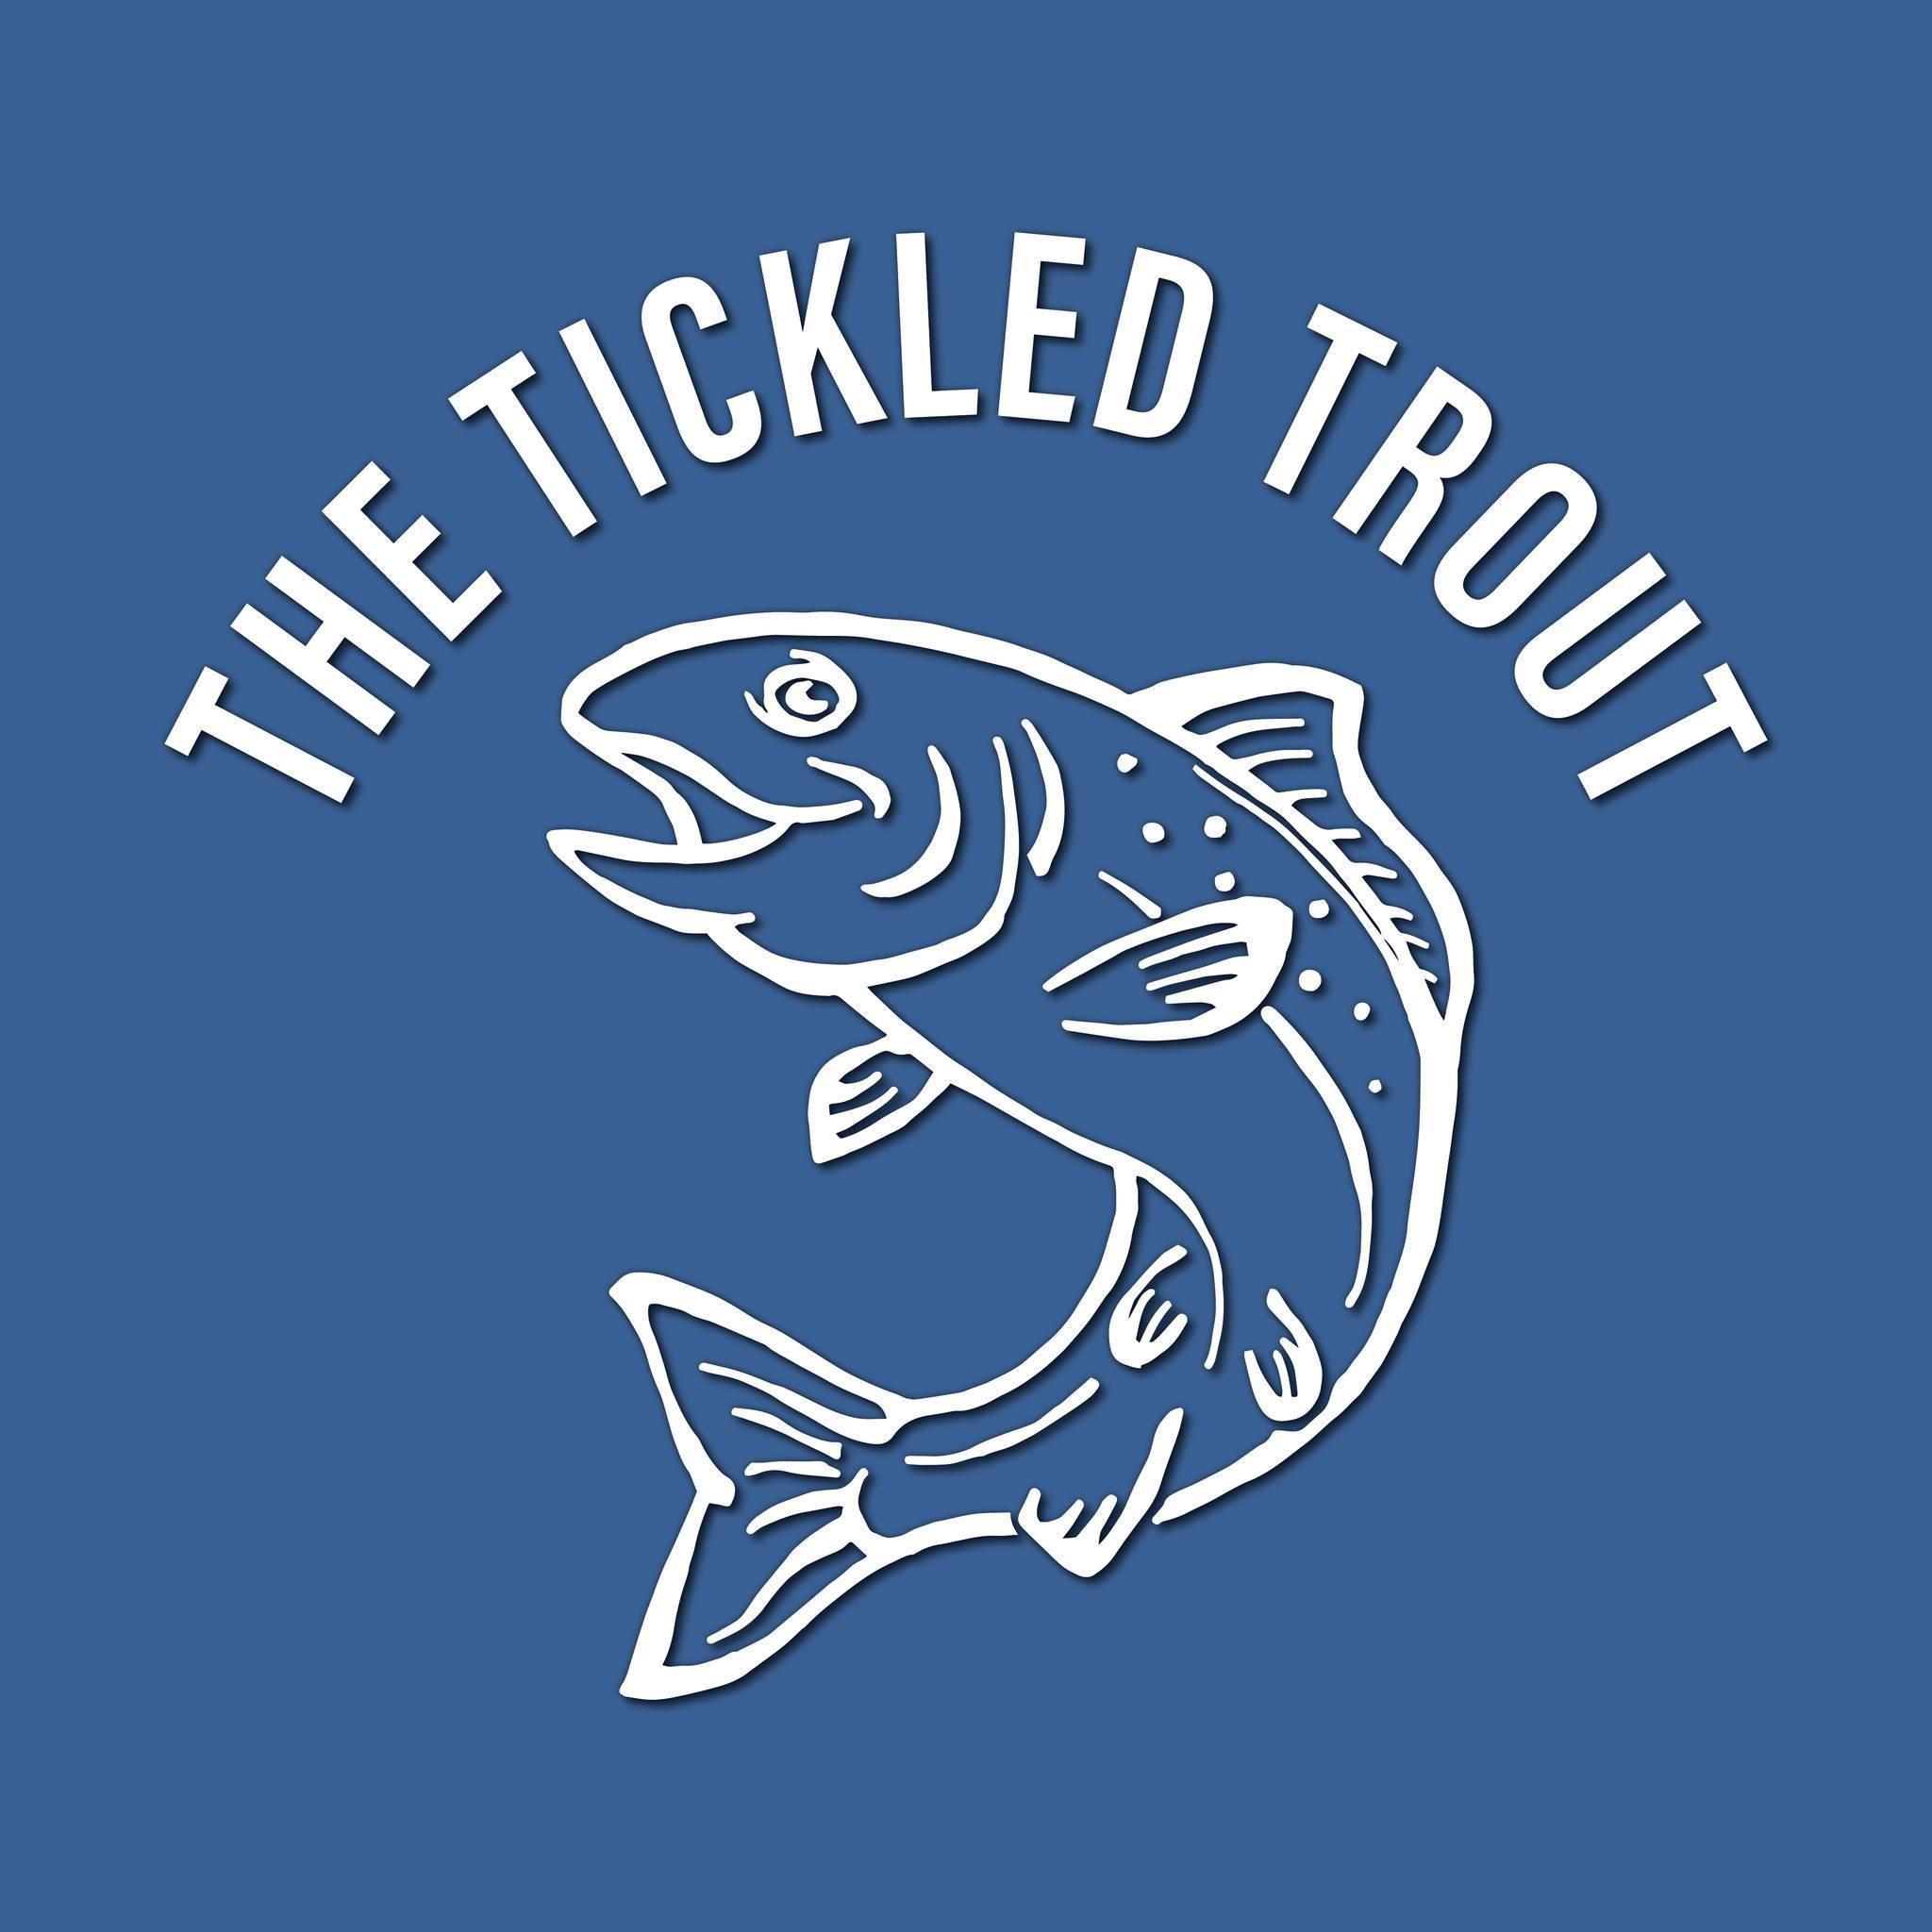 Macdonald Tickled Trout Hotel Logo